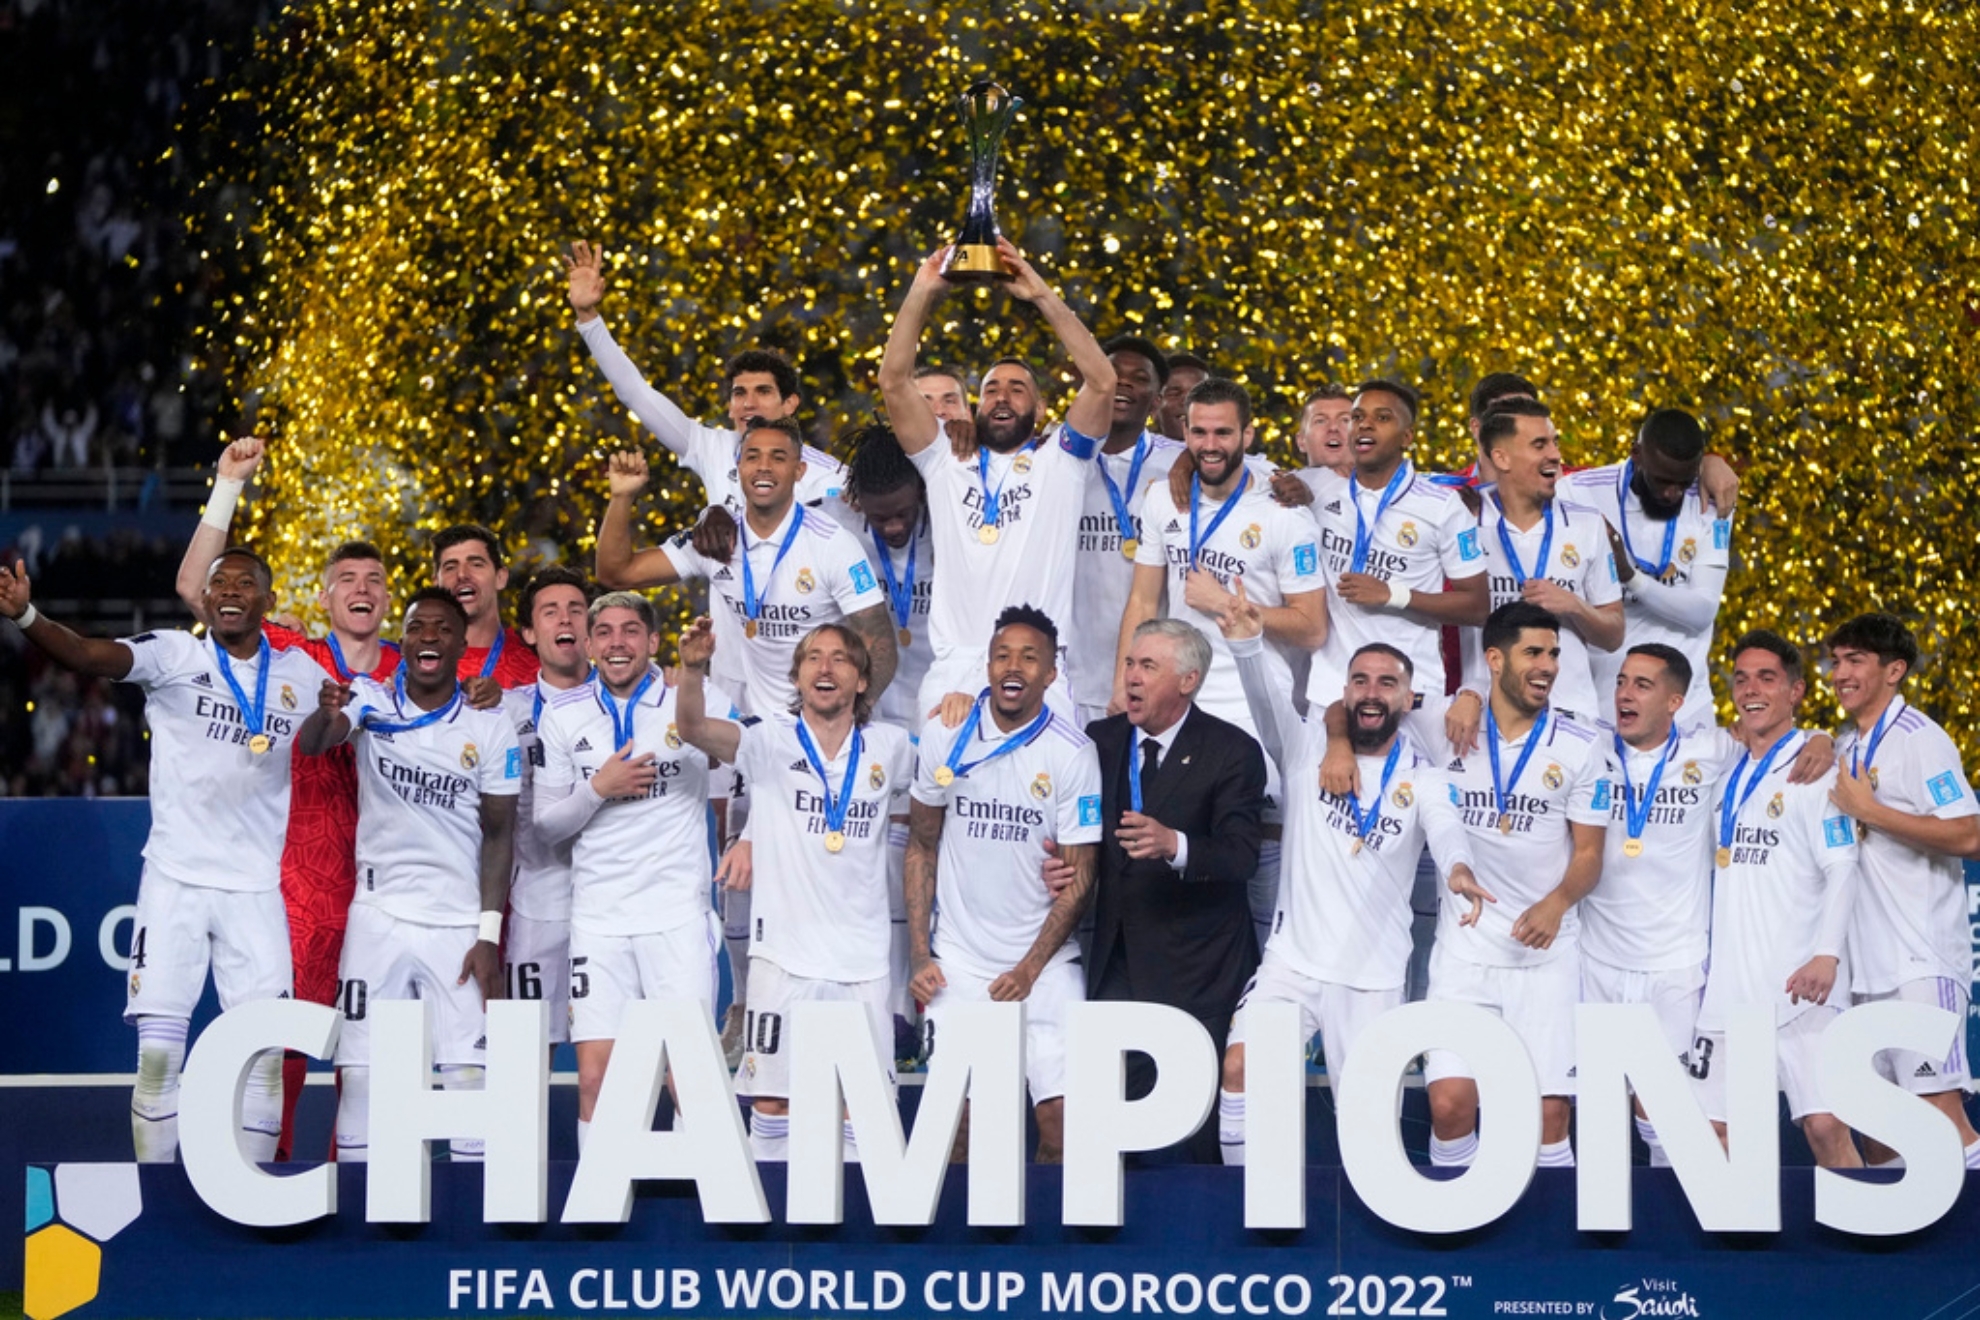 Real Madrid are current champions of the Club World Cup